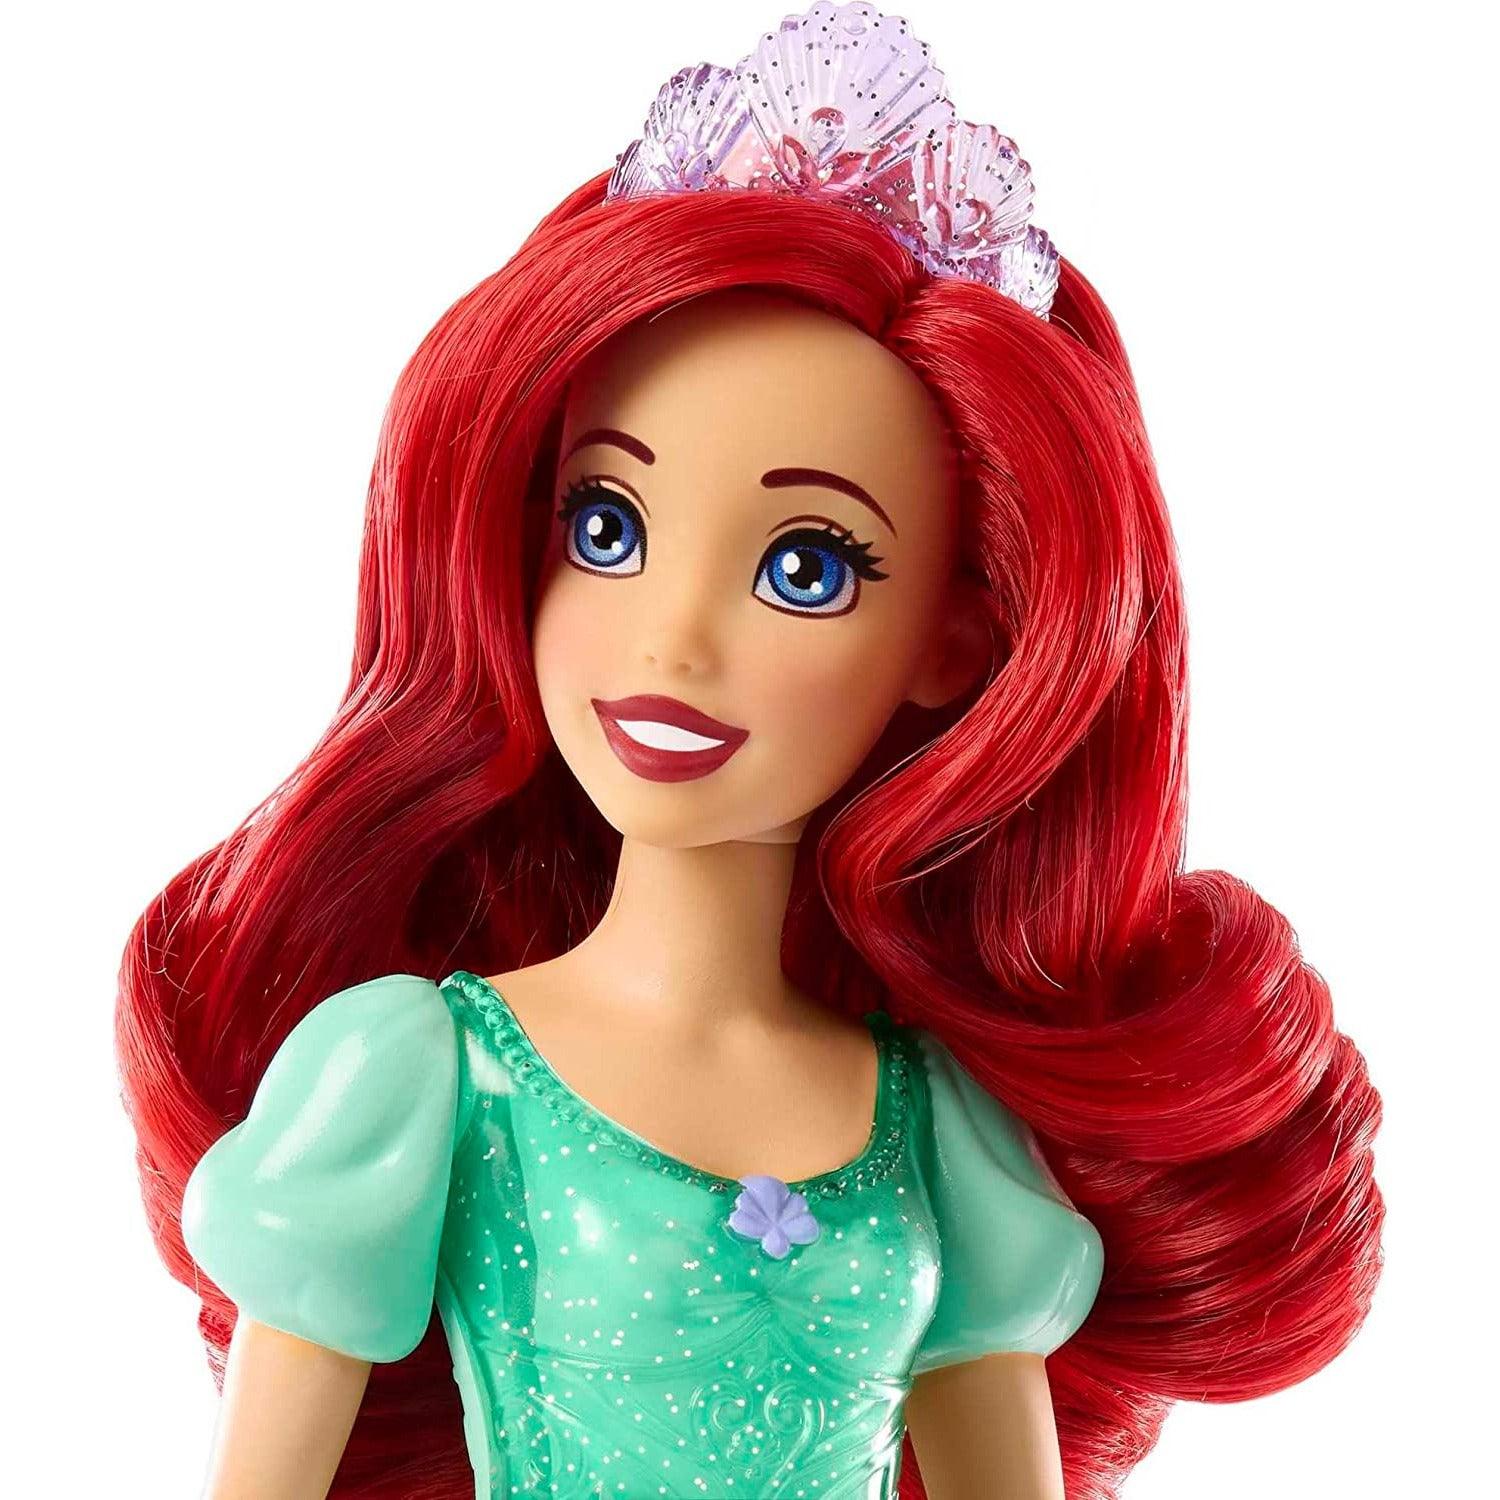 Disney Princess Dolls, New for 2023, Ariel Posable Fashion Doll with Sparkling Clothing and Accessories, Disney Movie Toys - BumbleToys - 5-7 Years, Ariel, Disney, Disney Princess, Fashion Dolls & Accessories, Girls